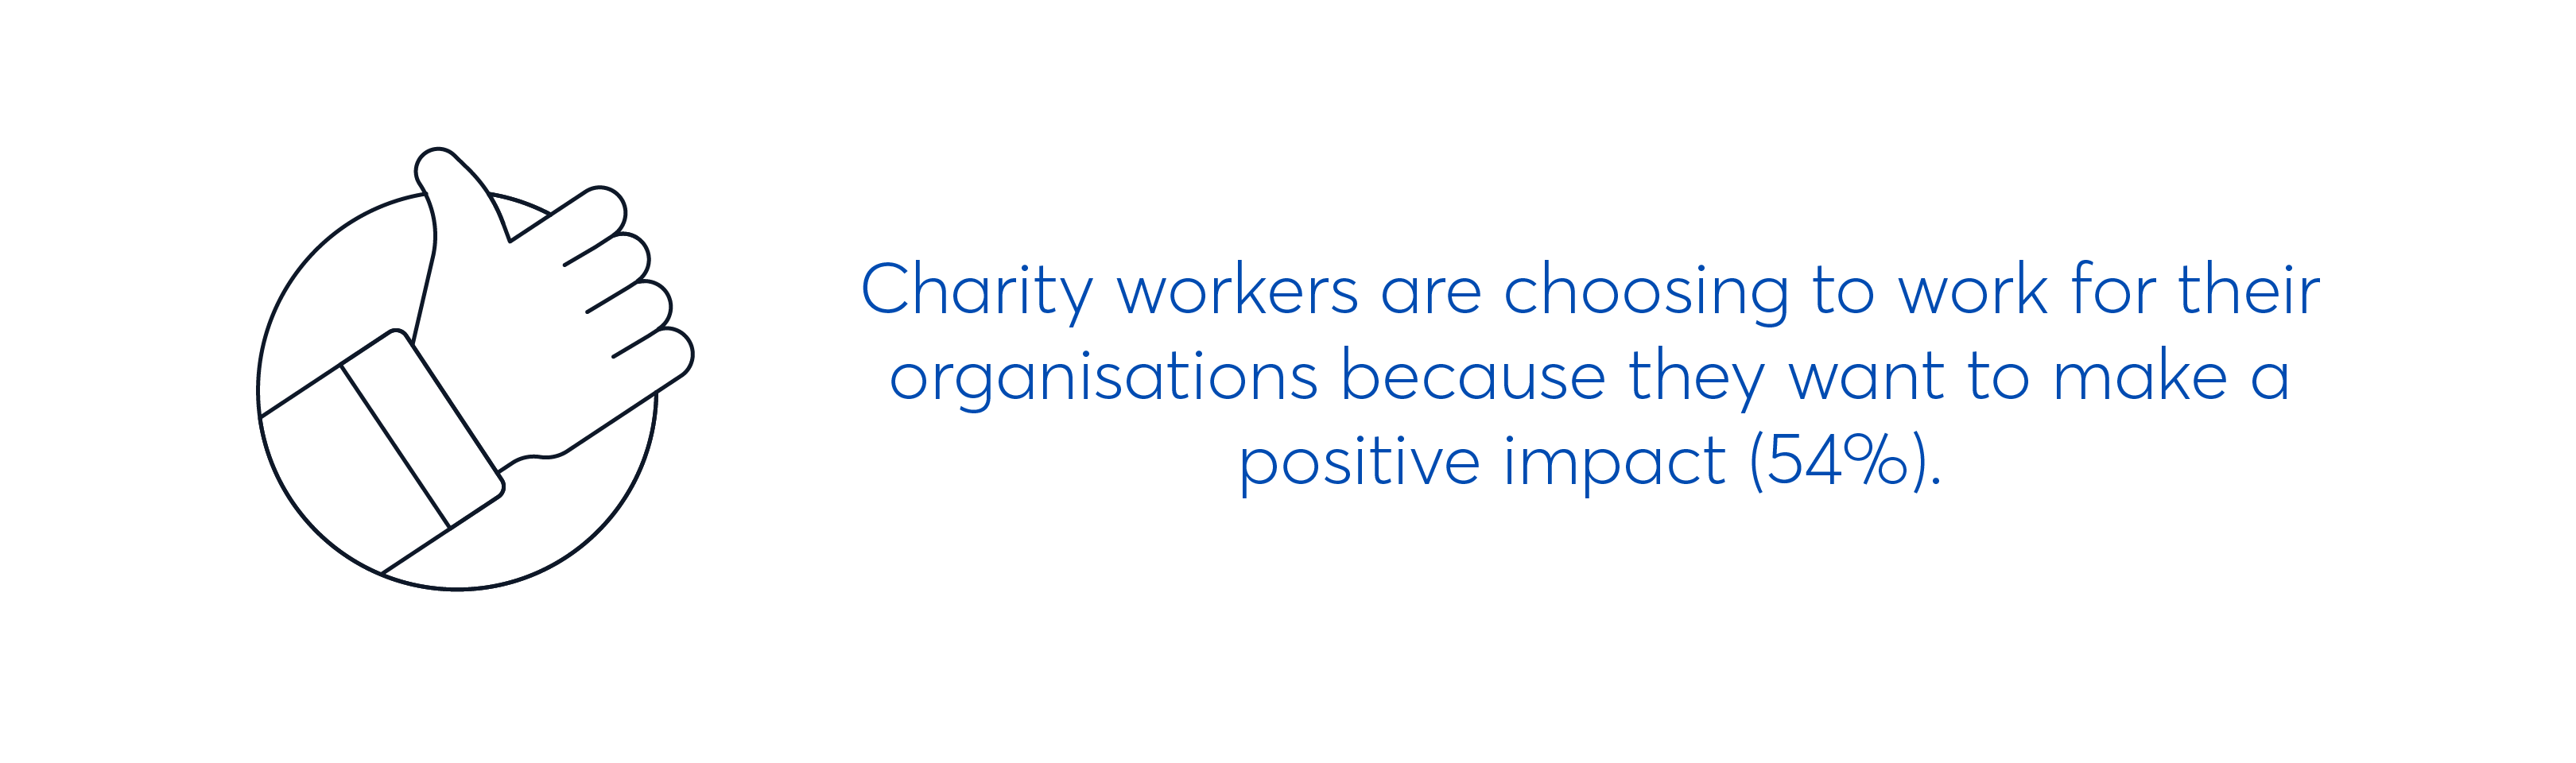 Choose charity because of positive impact